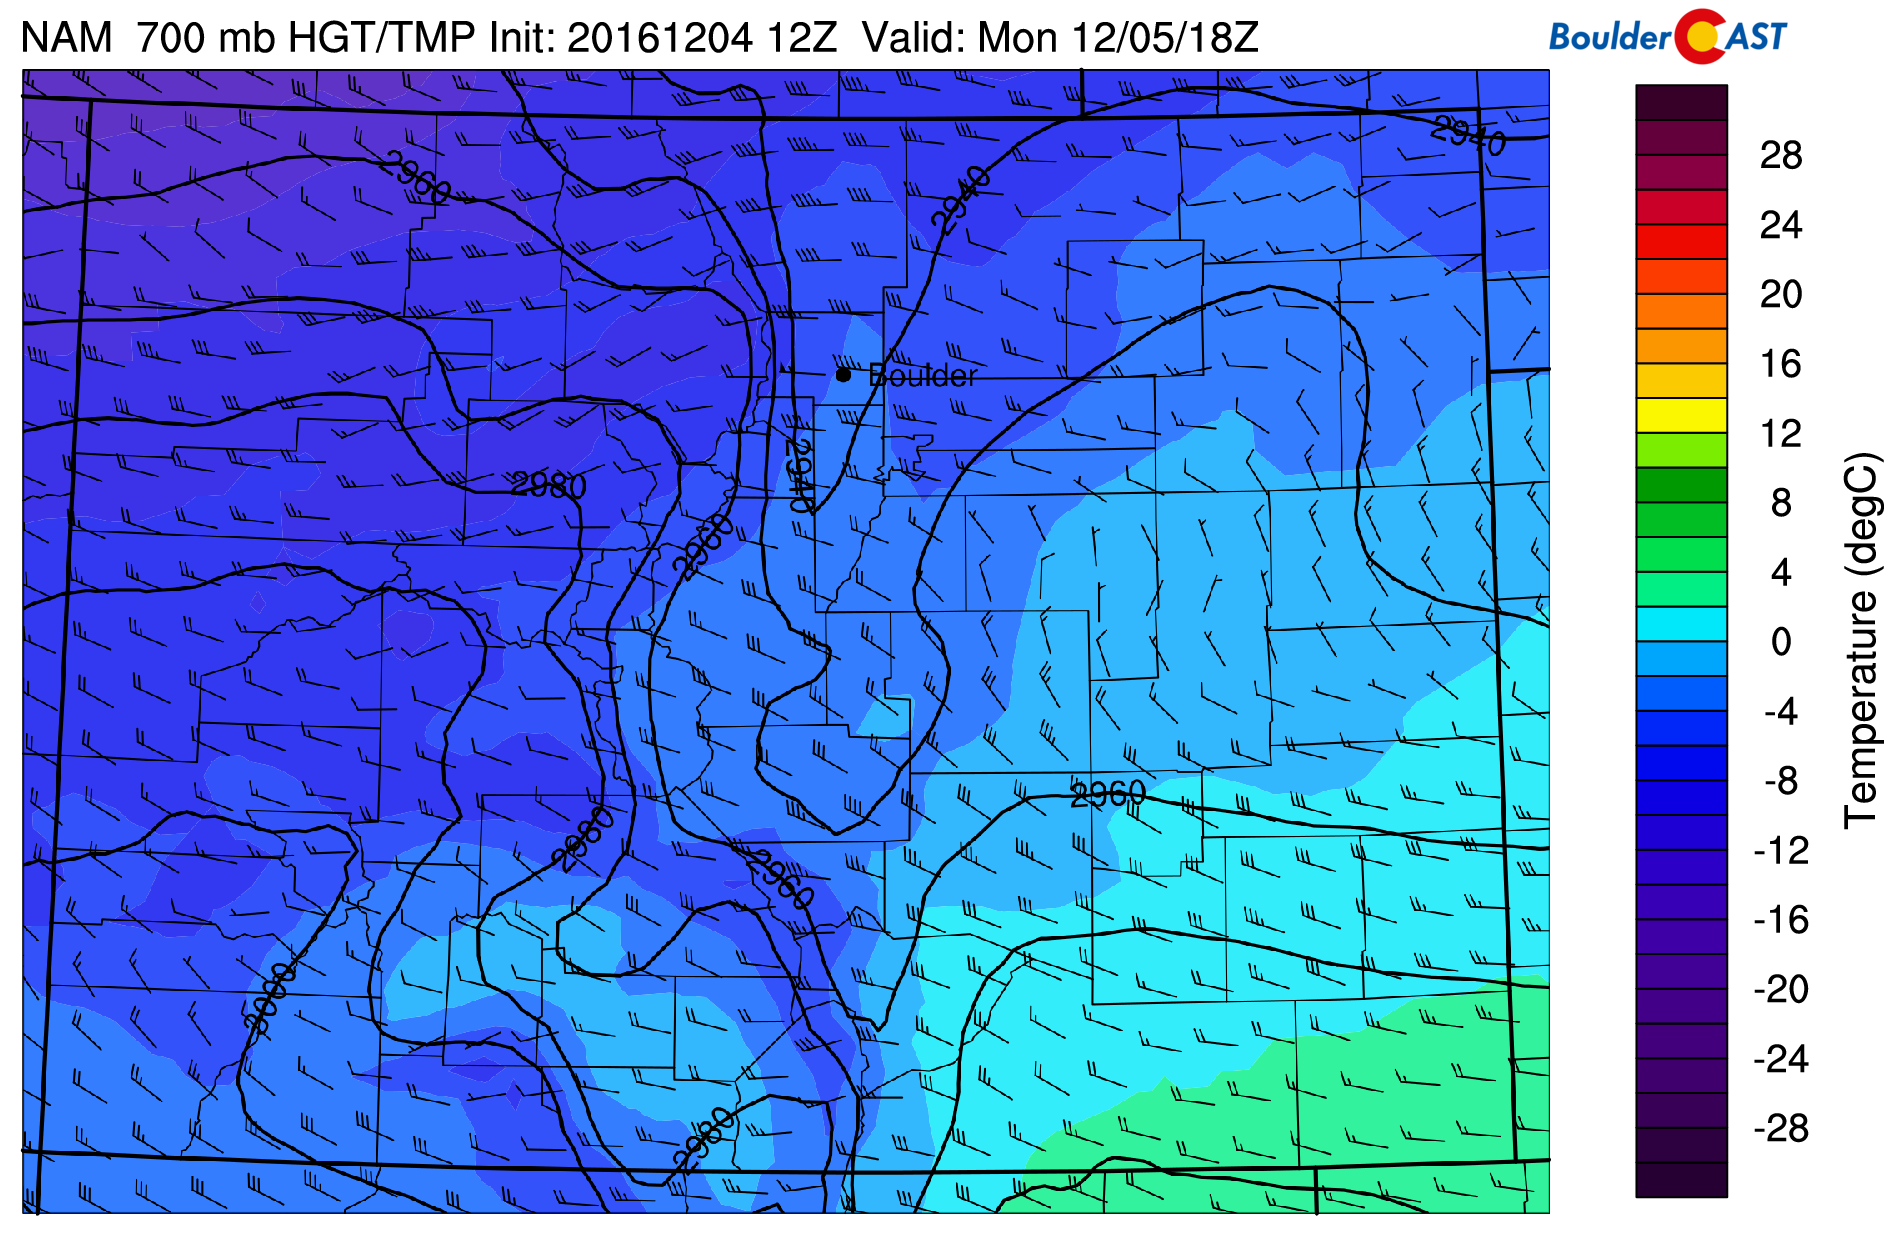 NAM 700 mb temperature and wind today